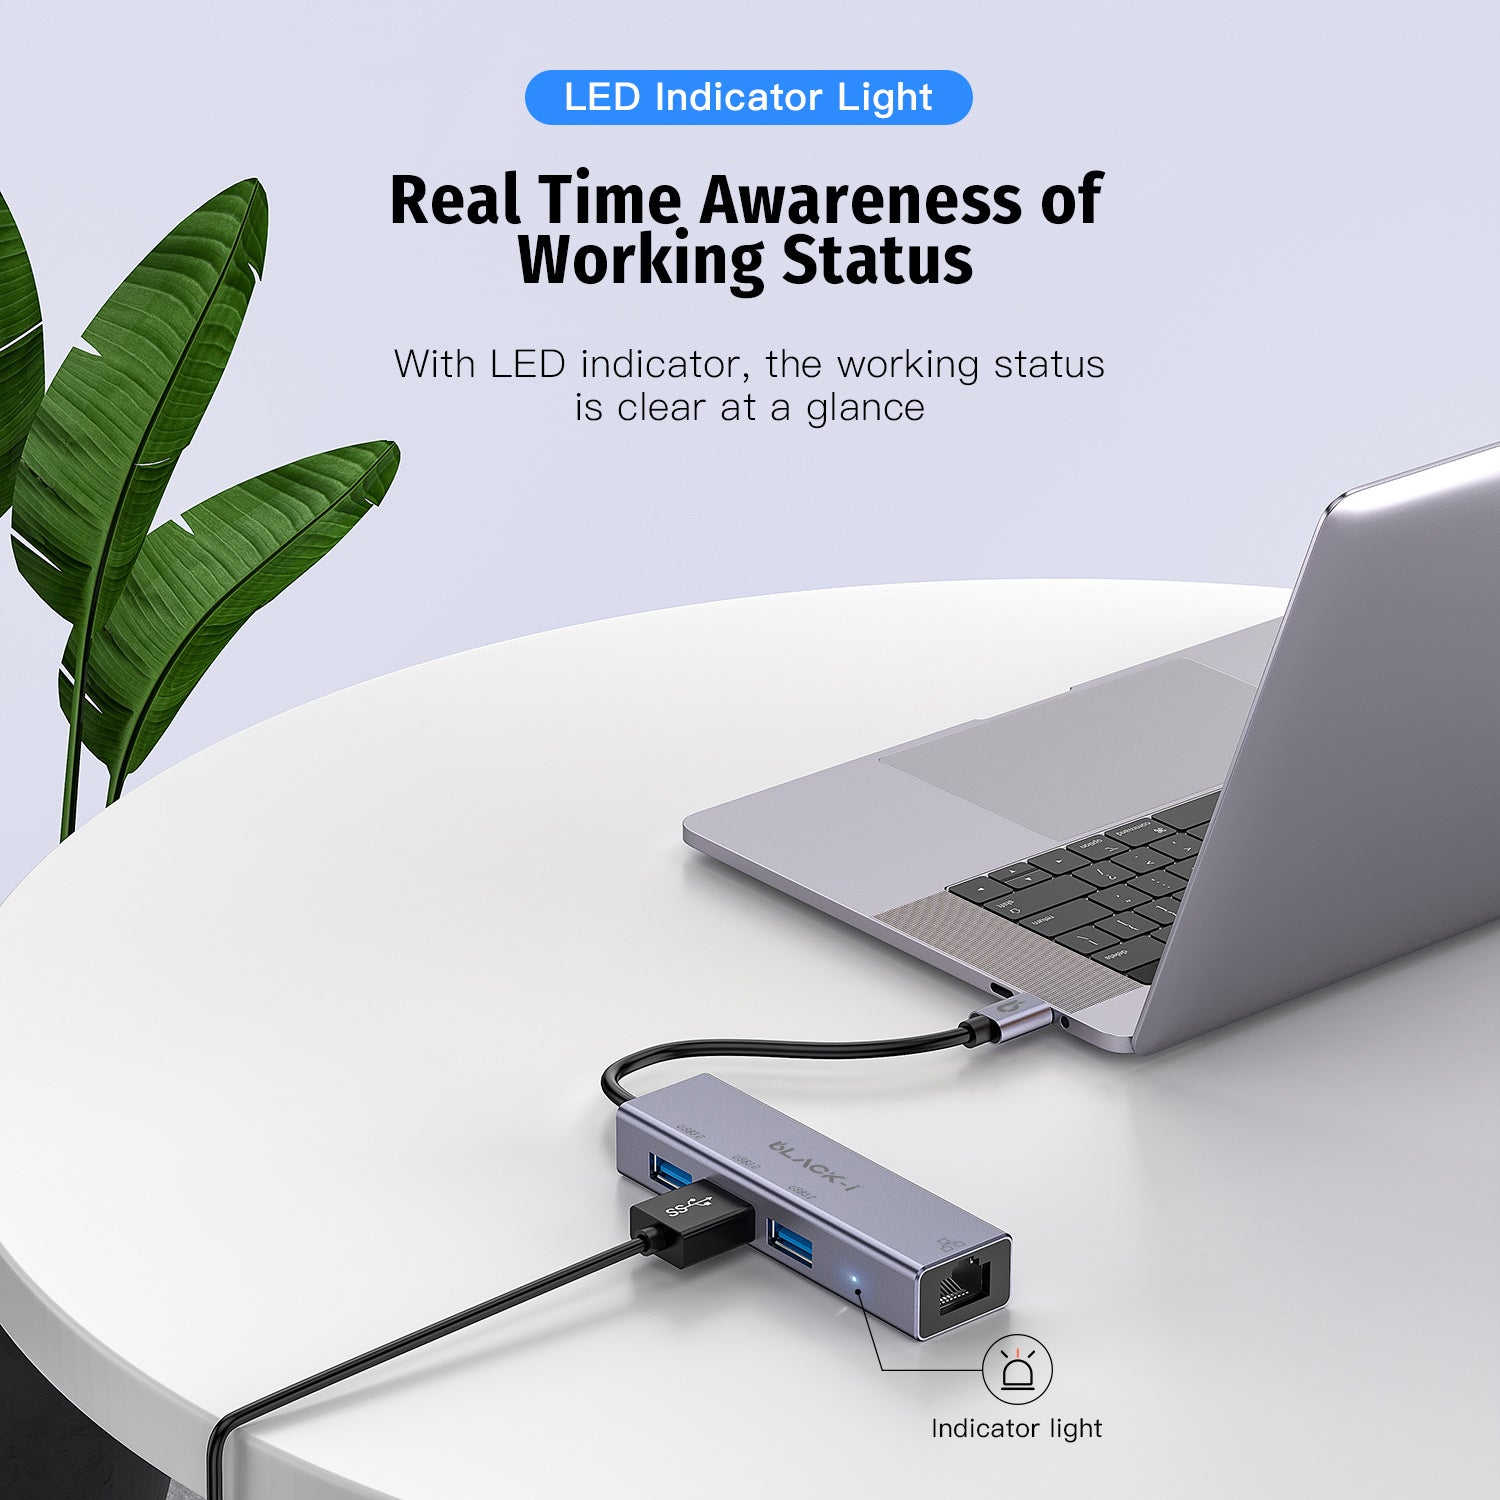 Black-i USB-C to 3-Port USB 3.0 Hub & Gigabit LAN – Expand Connectivity with High-Speed Data Transfer and Reliable Network Access